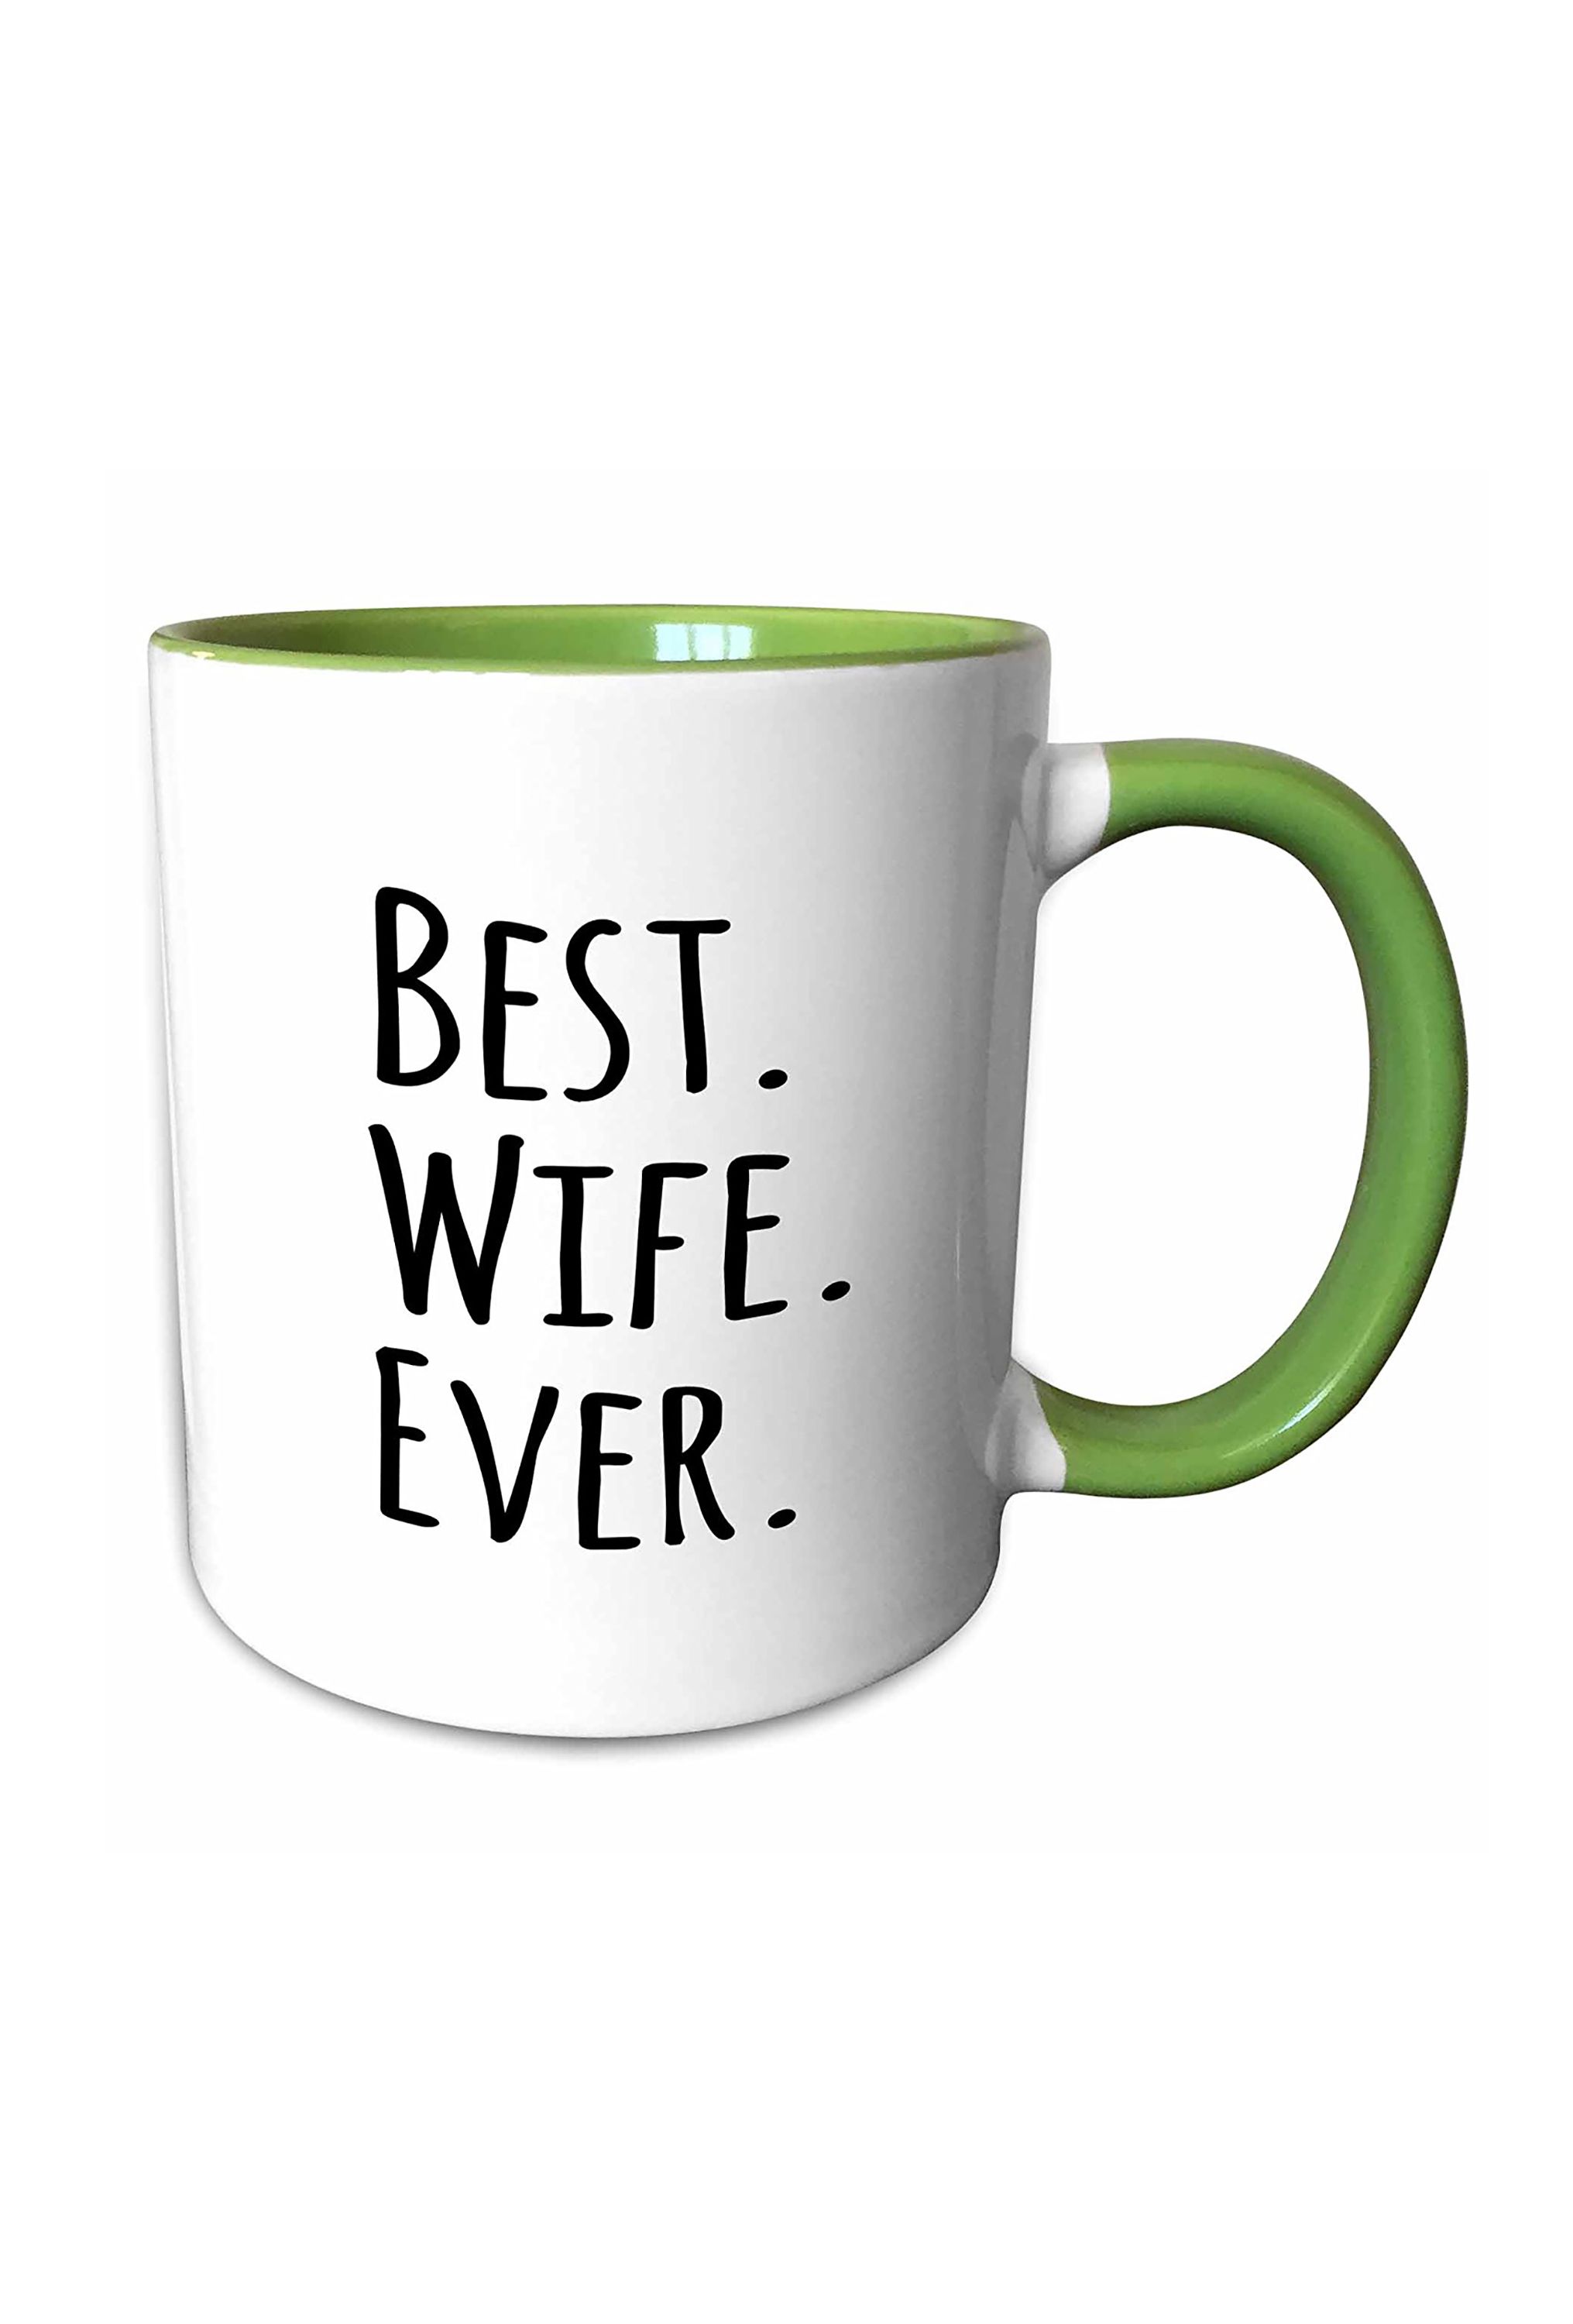 marriage anniversary gifts for wife